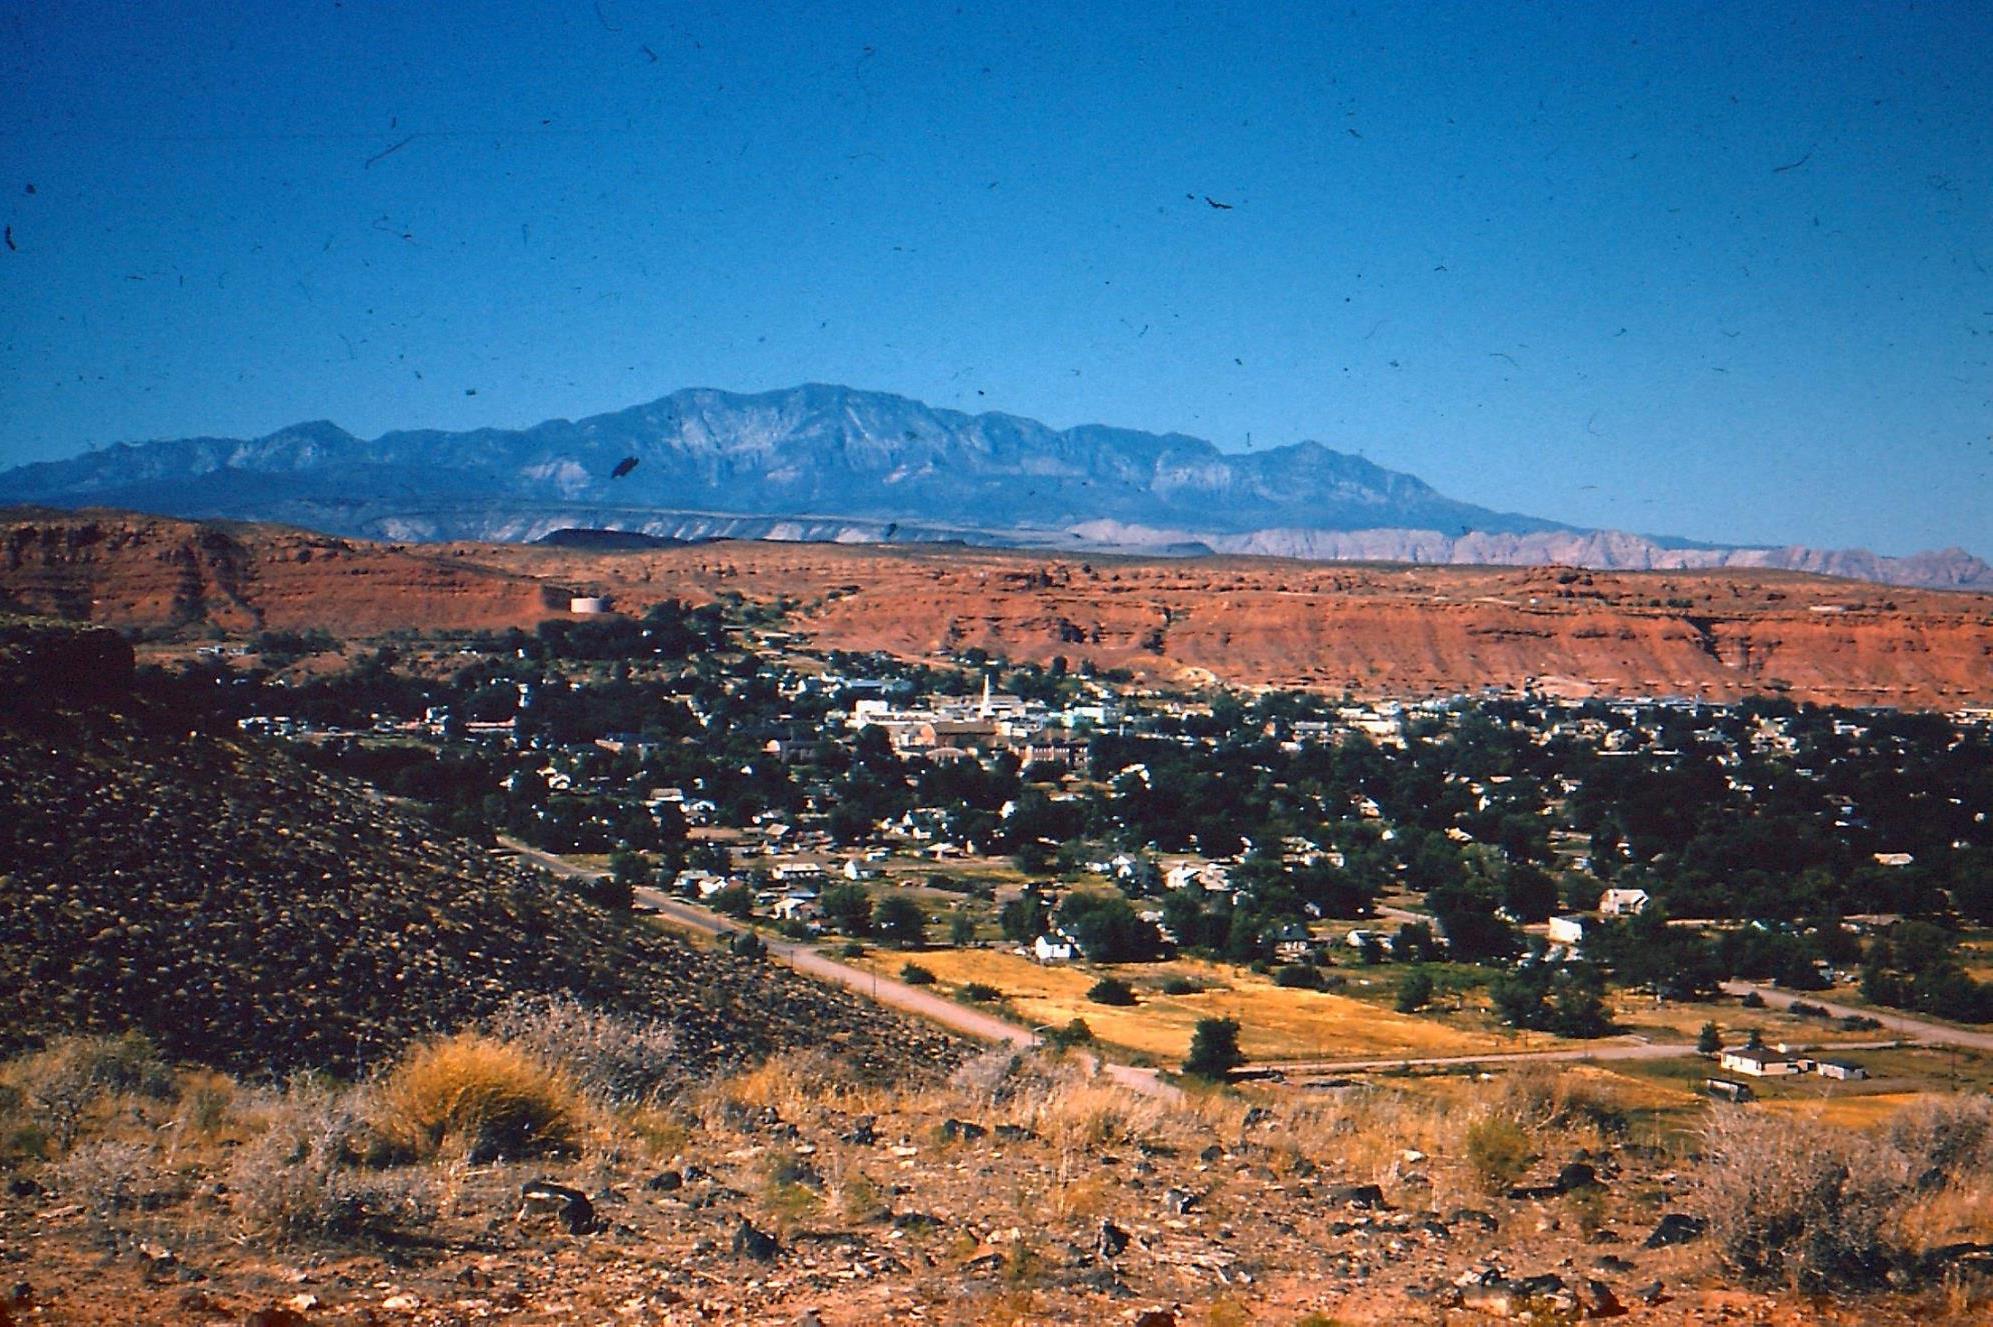 St. George in the 1950s seen from the airport on the Black Hill